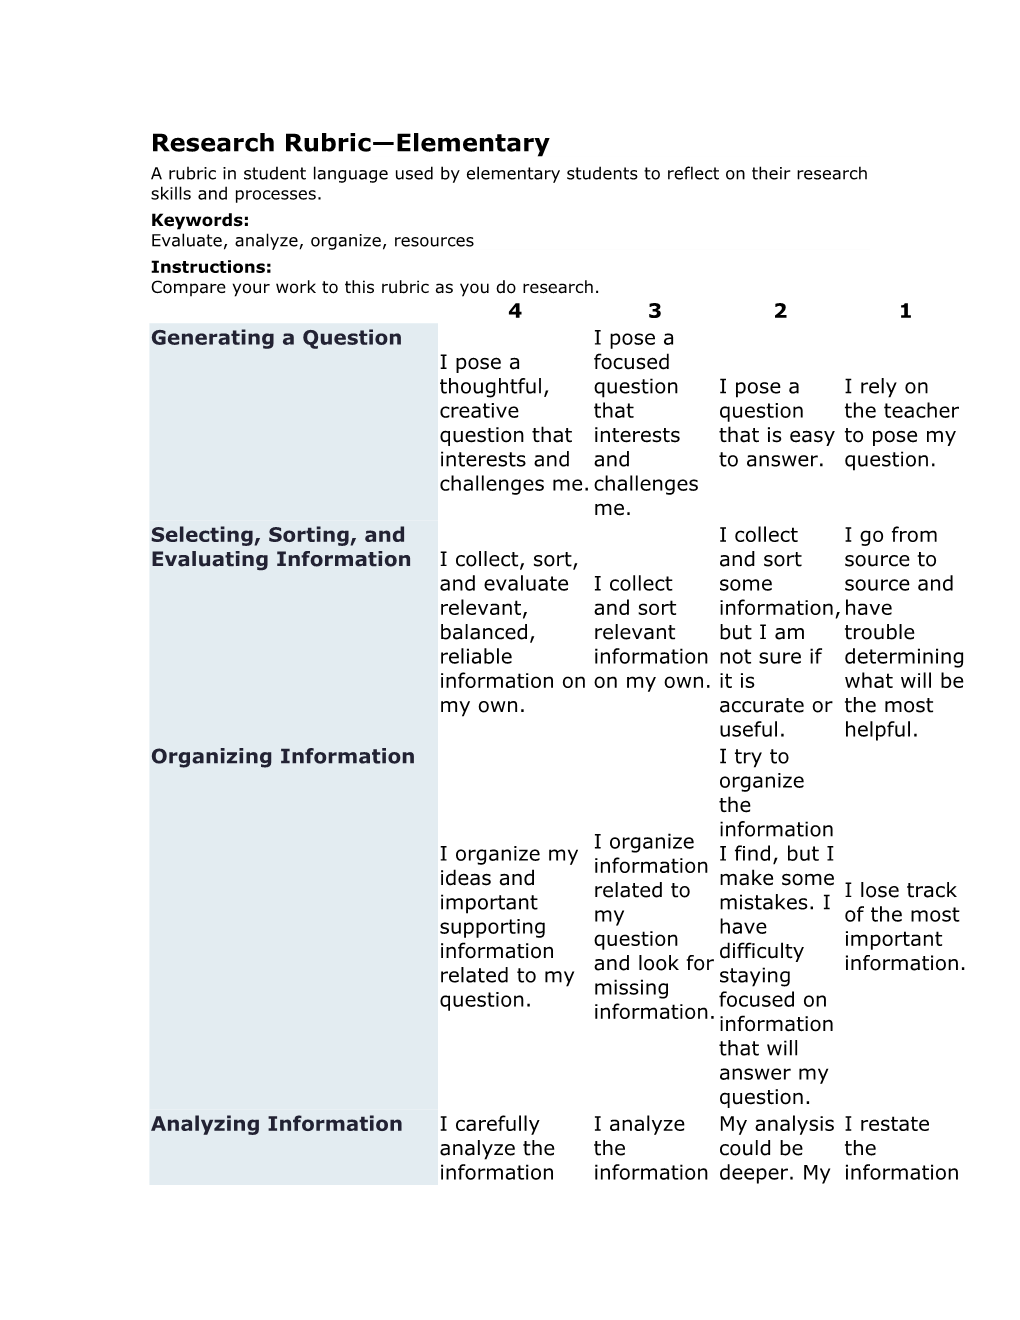 Research Rubric Elementary